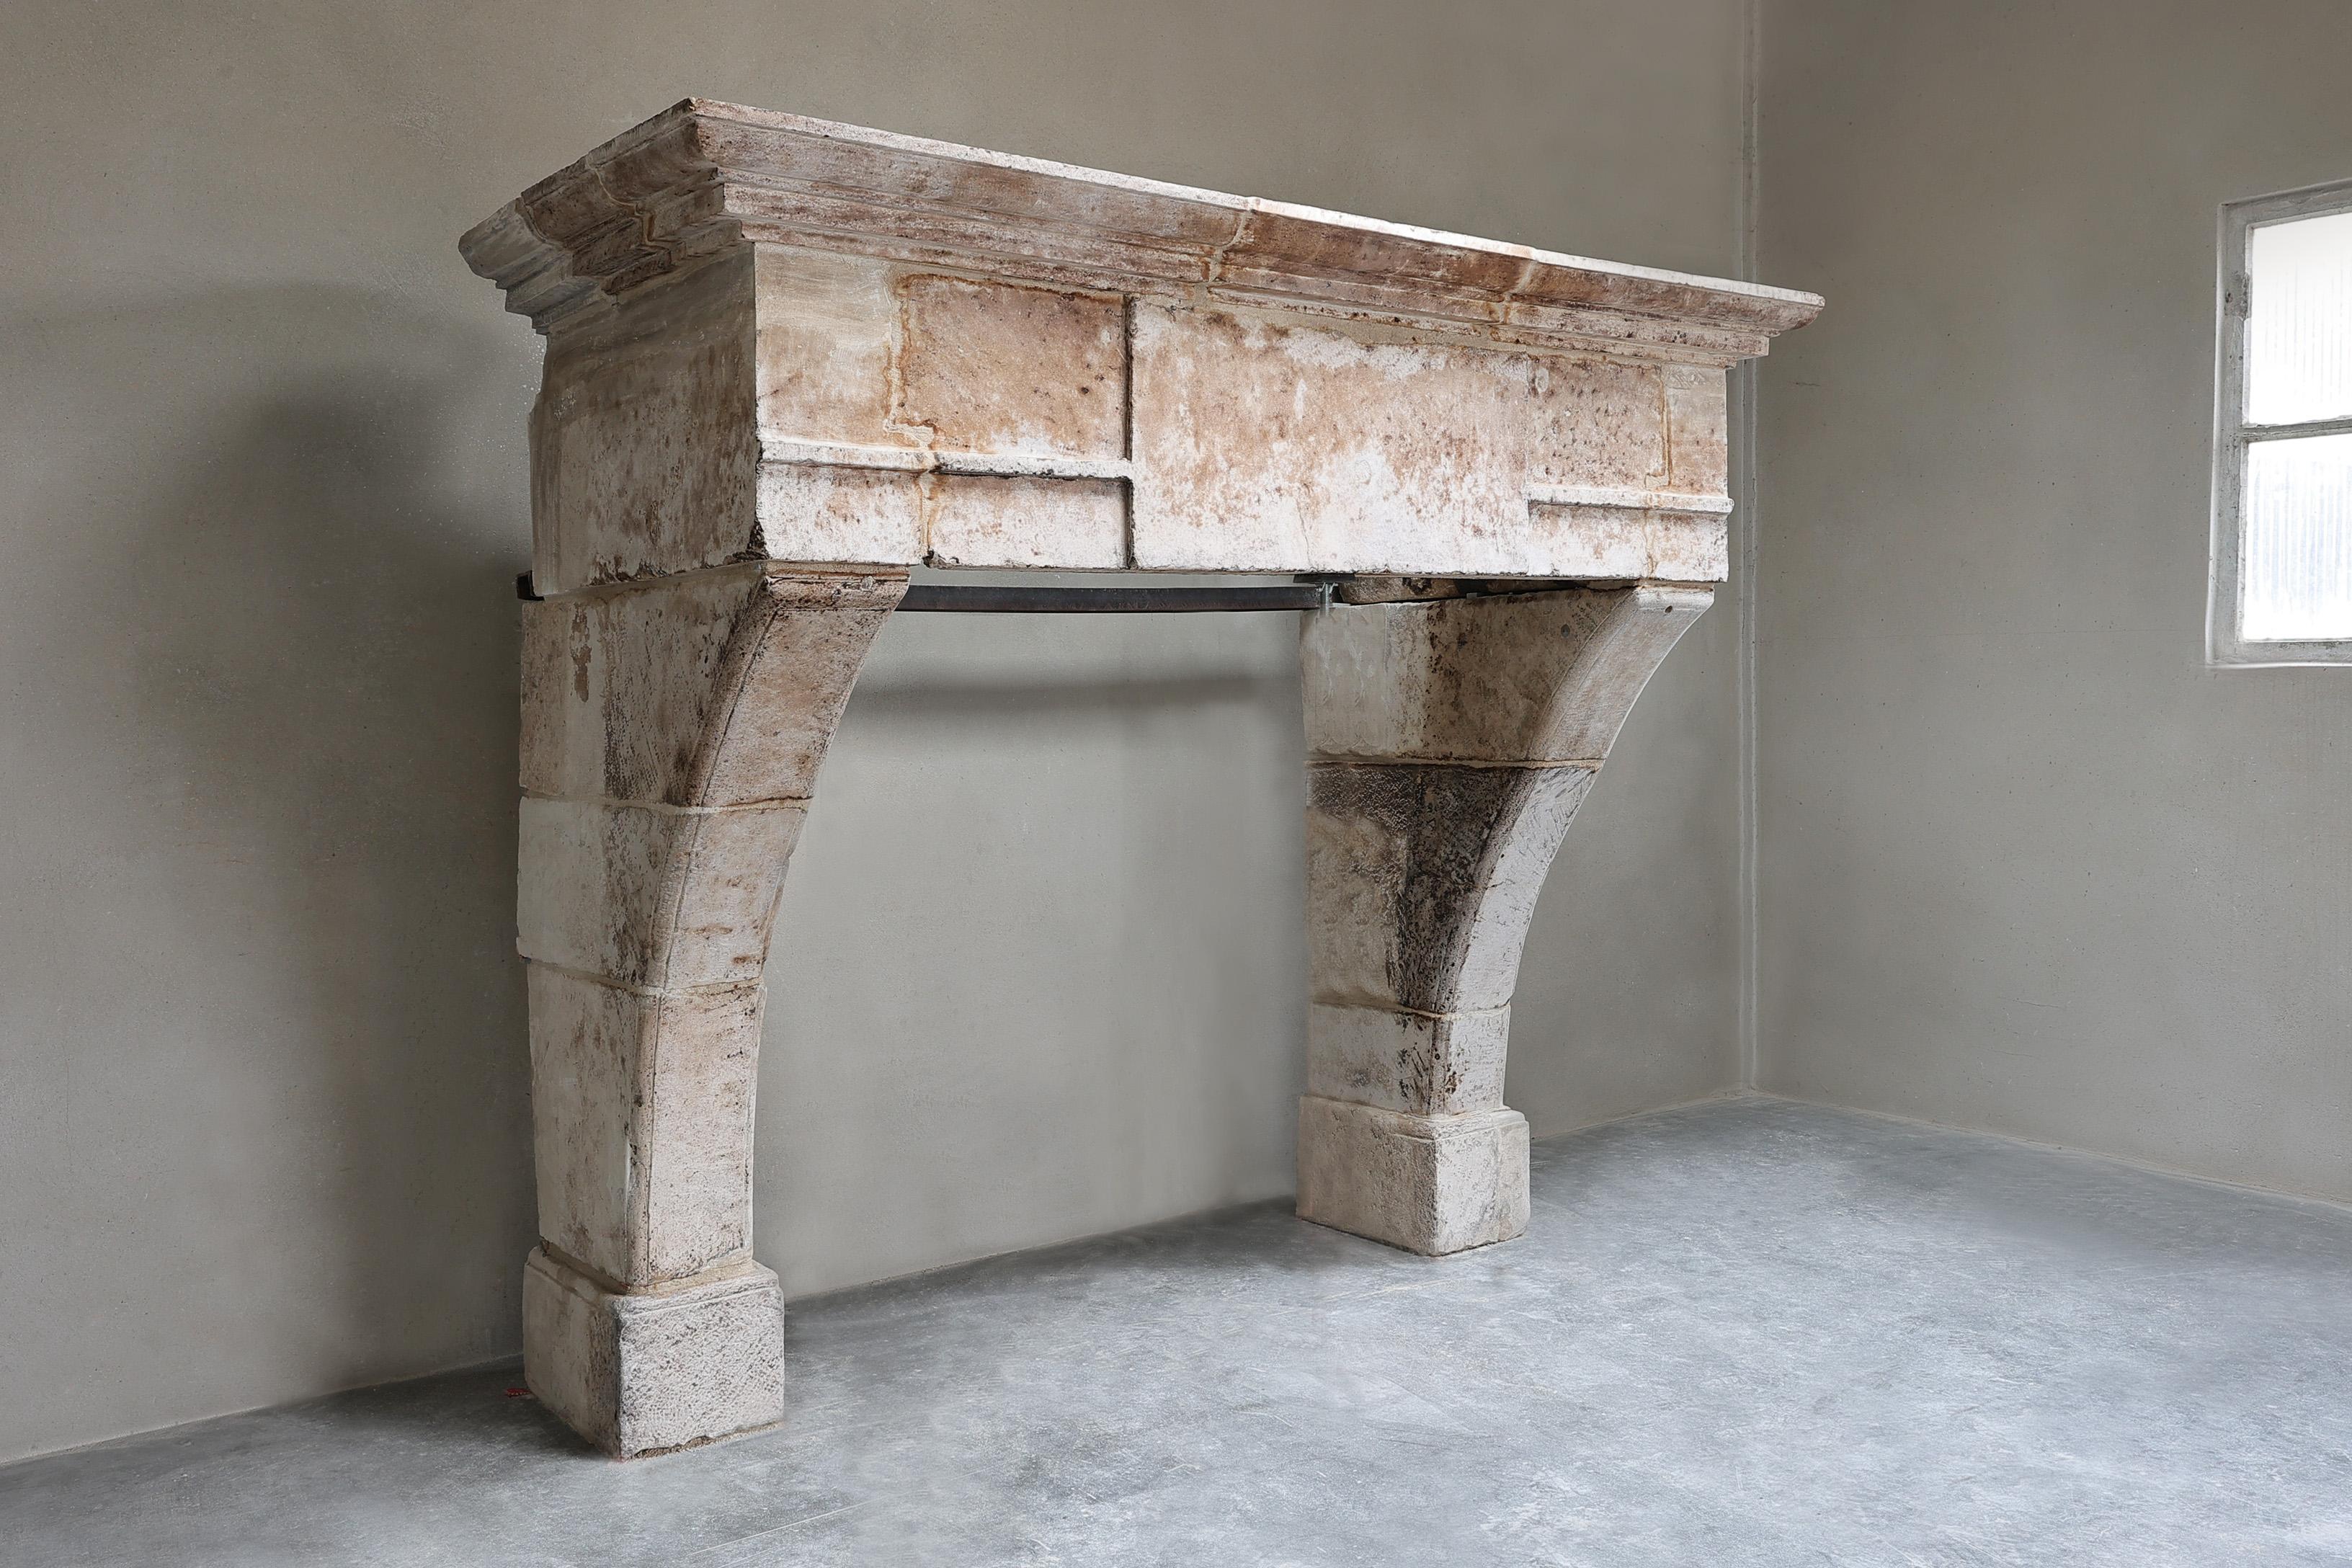 Beautiful imposing castle mantelpiece made of French limestone! A very robust antique fireplace from the 18th century with a wide front section and slender legs. This fireplace is both an eye-catcher for your interior and an added value for your